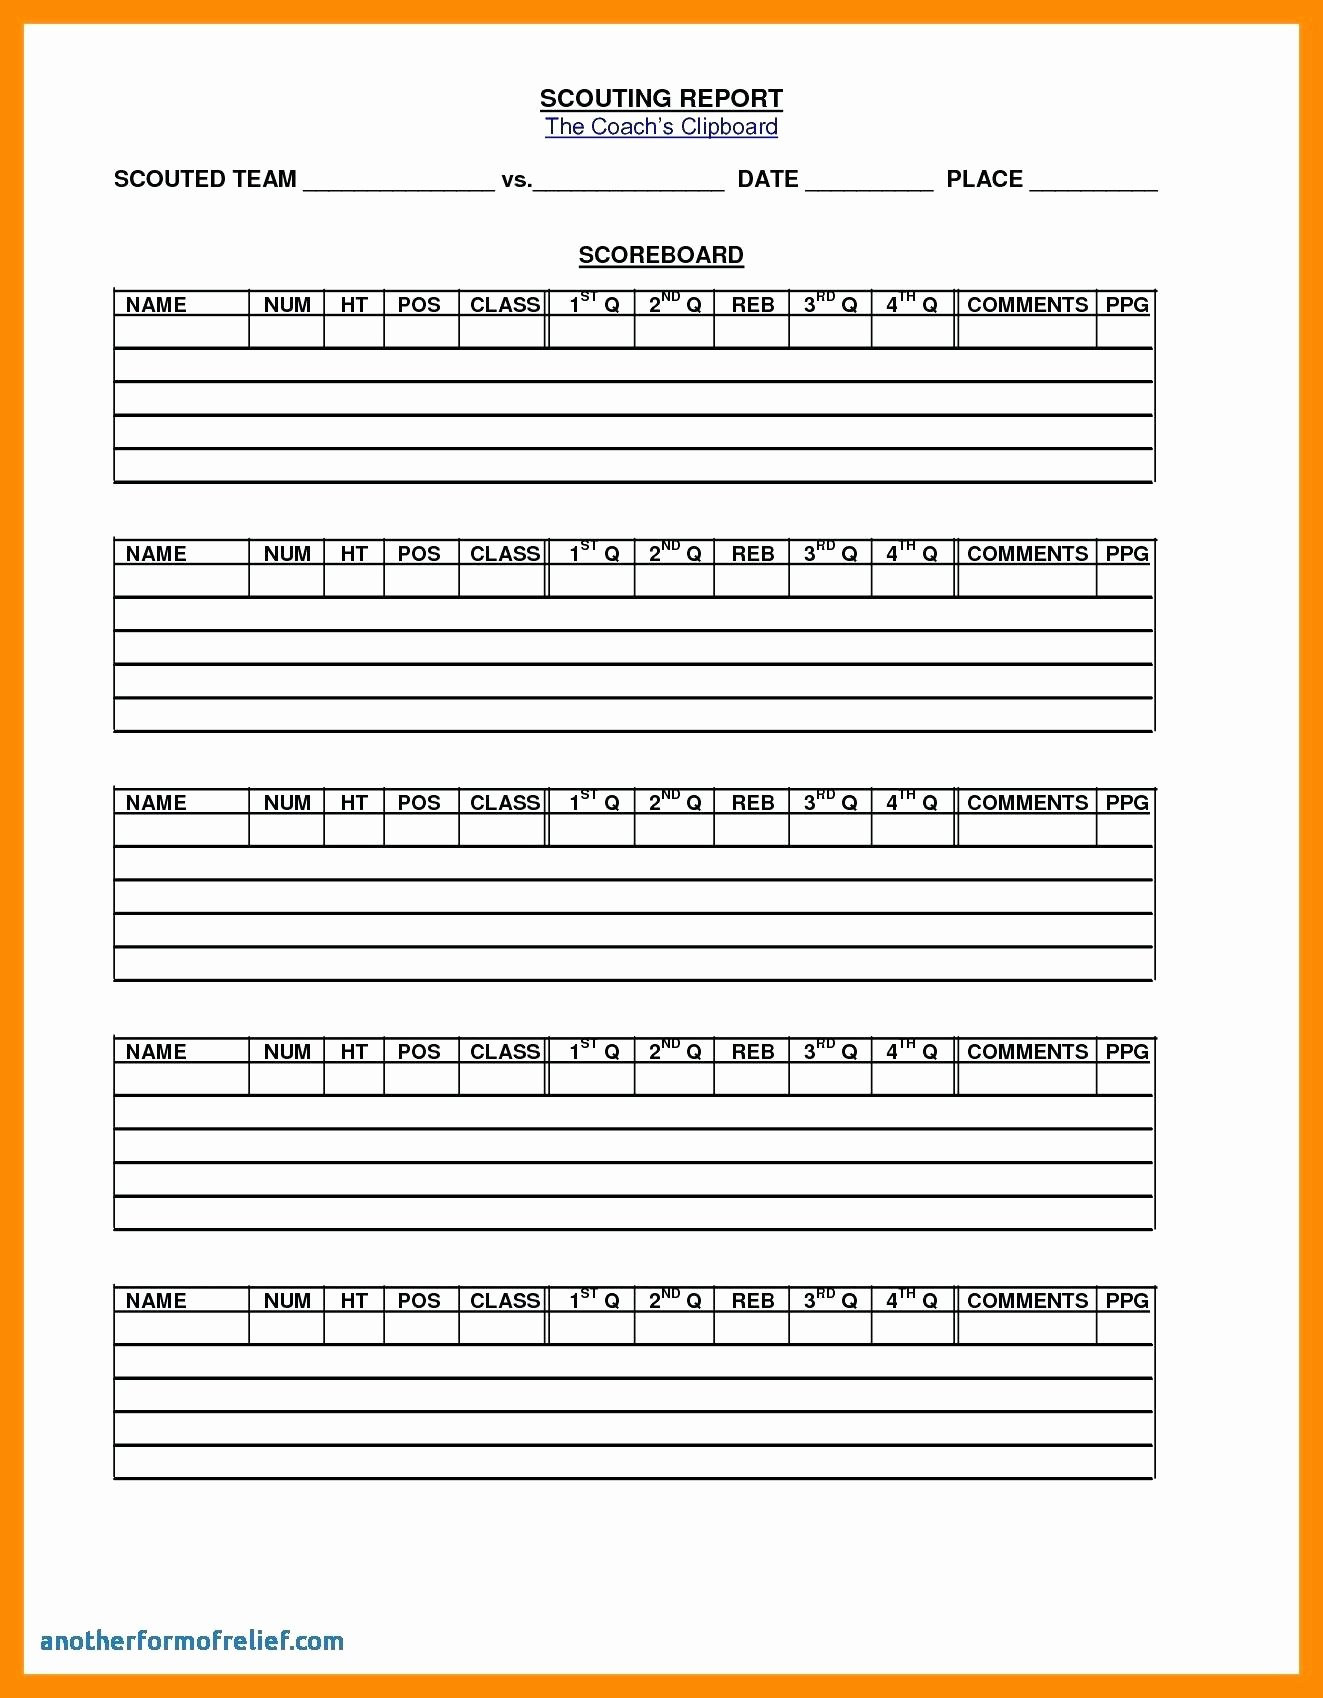 Free Baseball Stats Spreadsheet Excel Stat Sheet Blank For Football Scouting Report Template